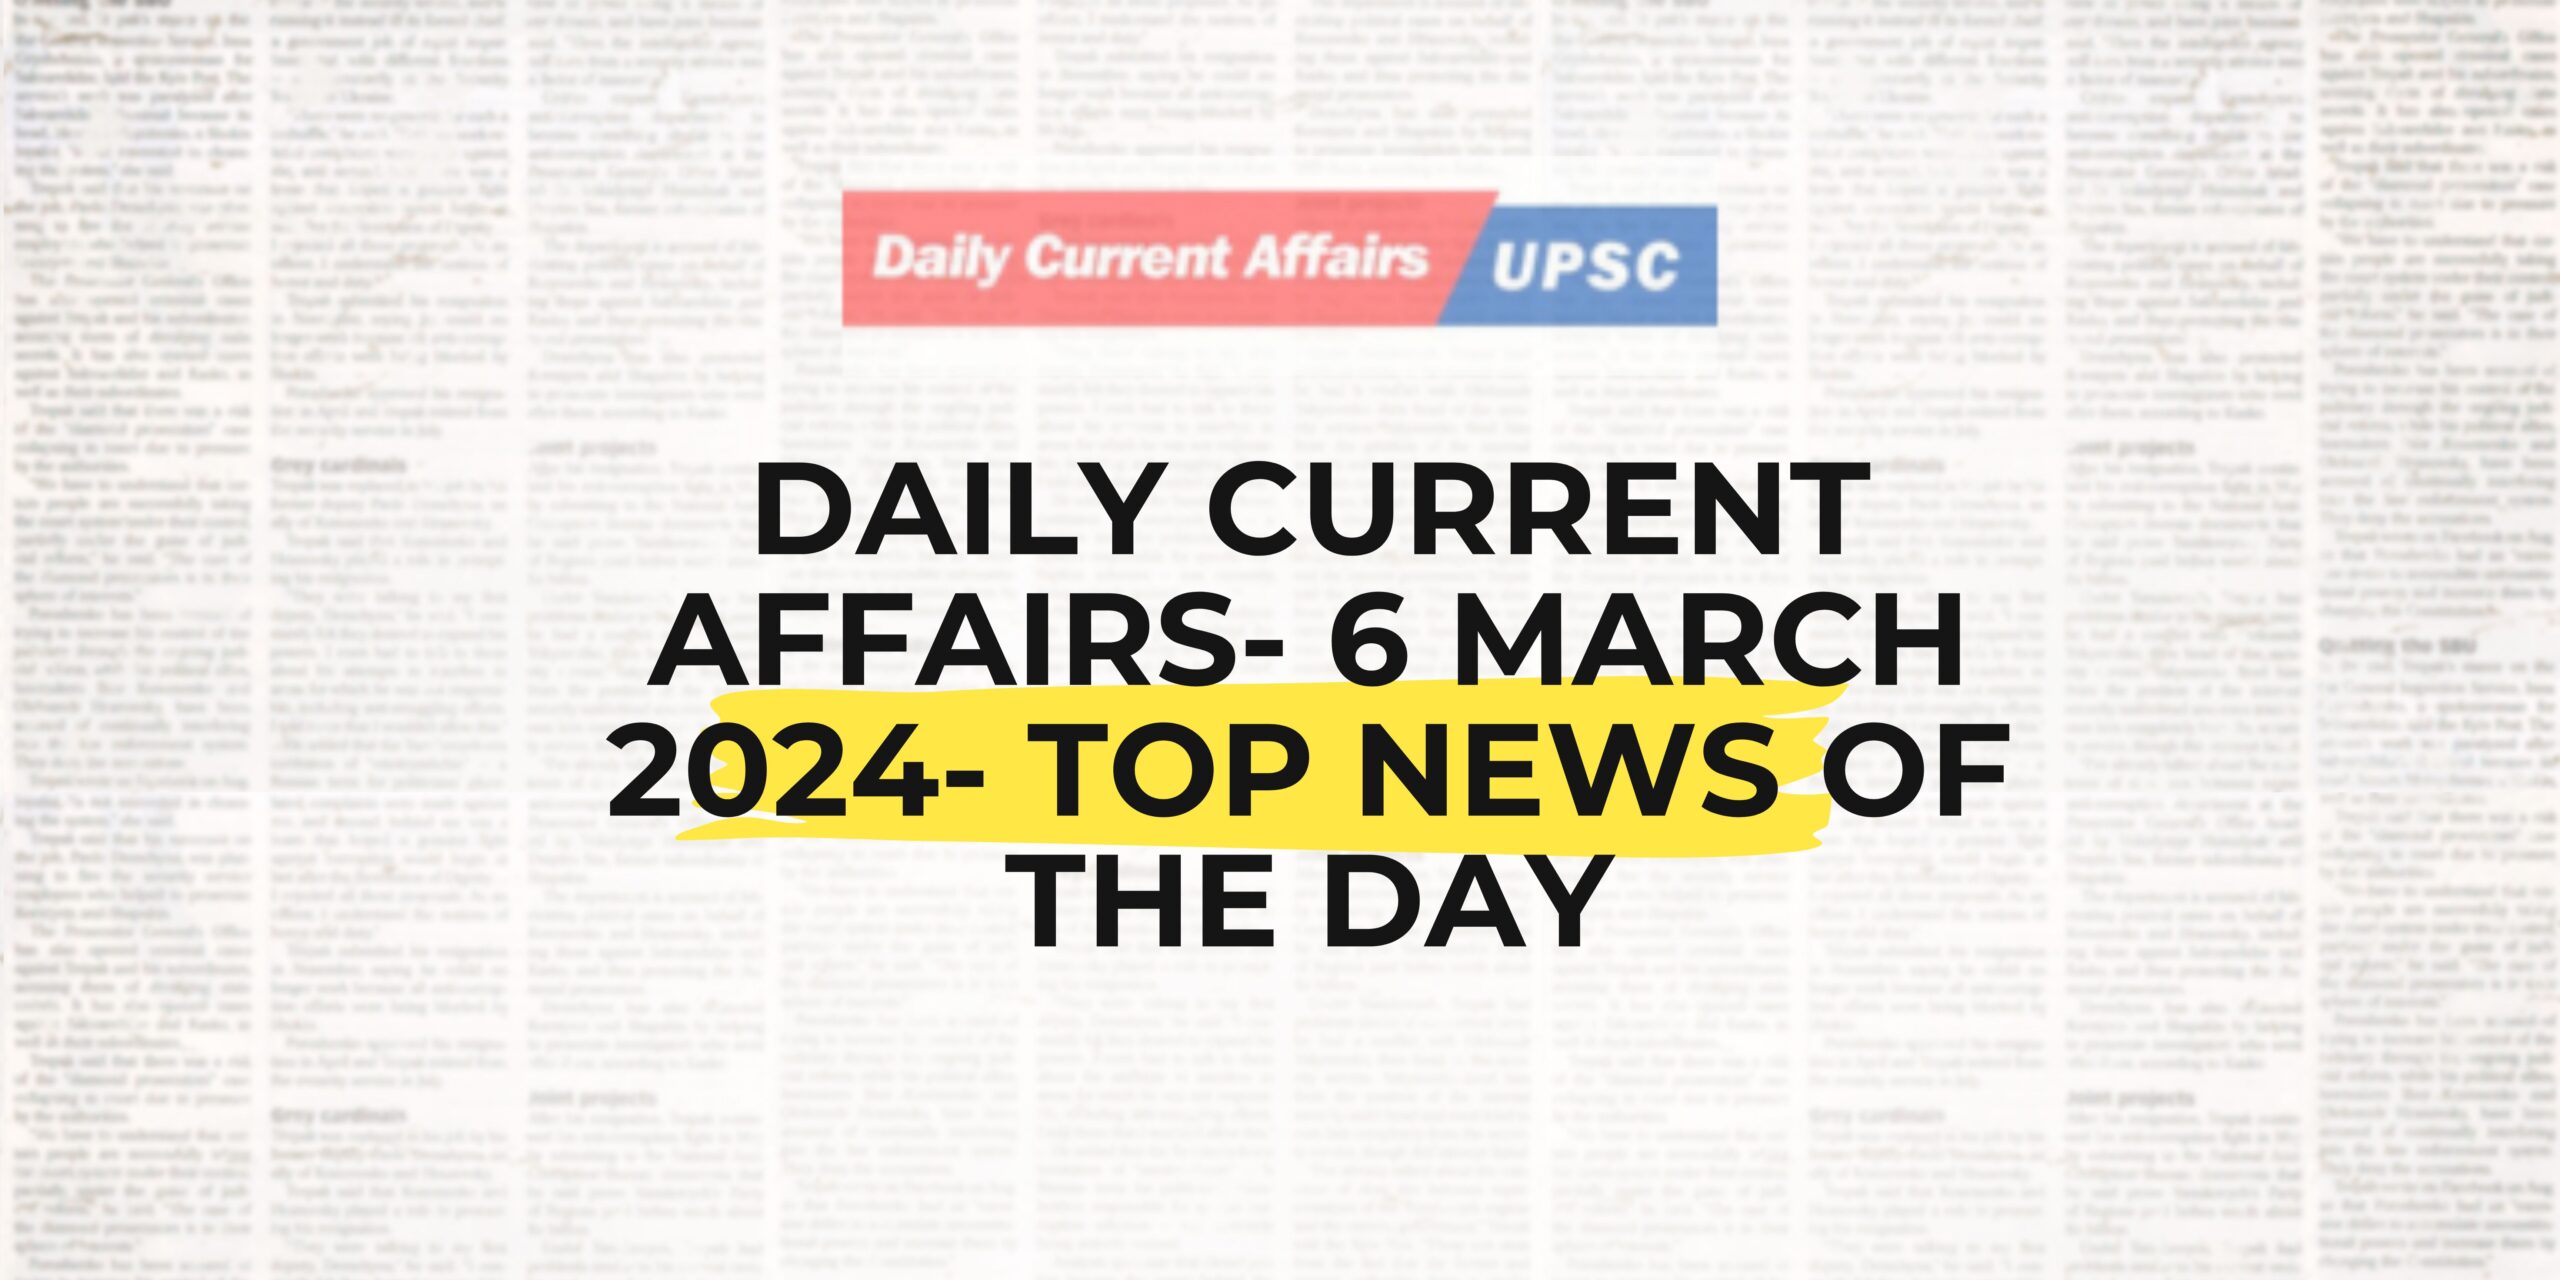 Daily Current Affairs 6 March 2024- Top News Of The Day